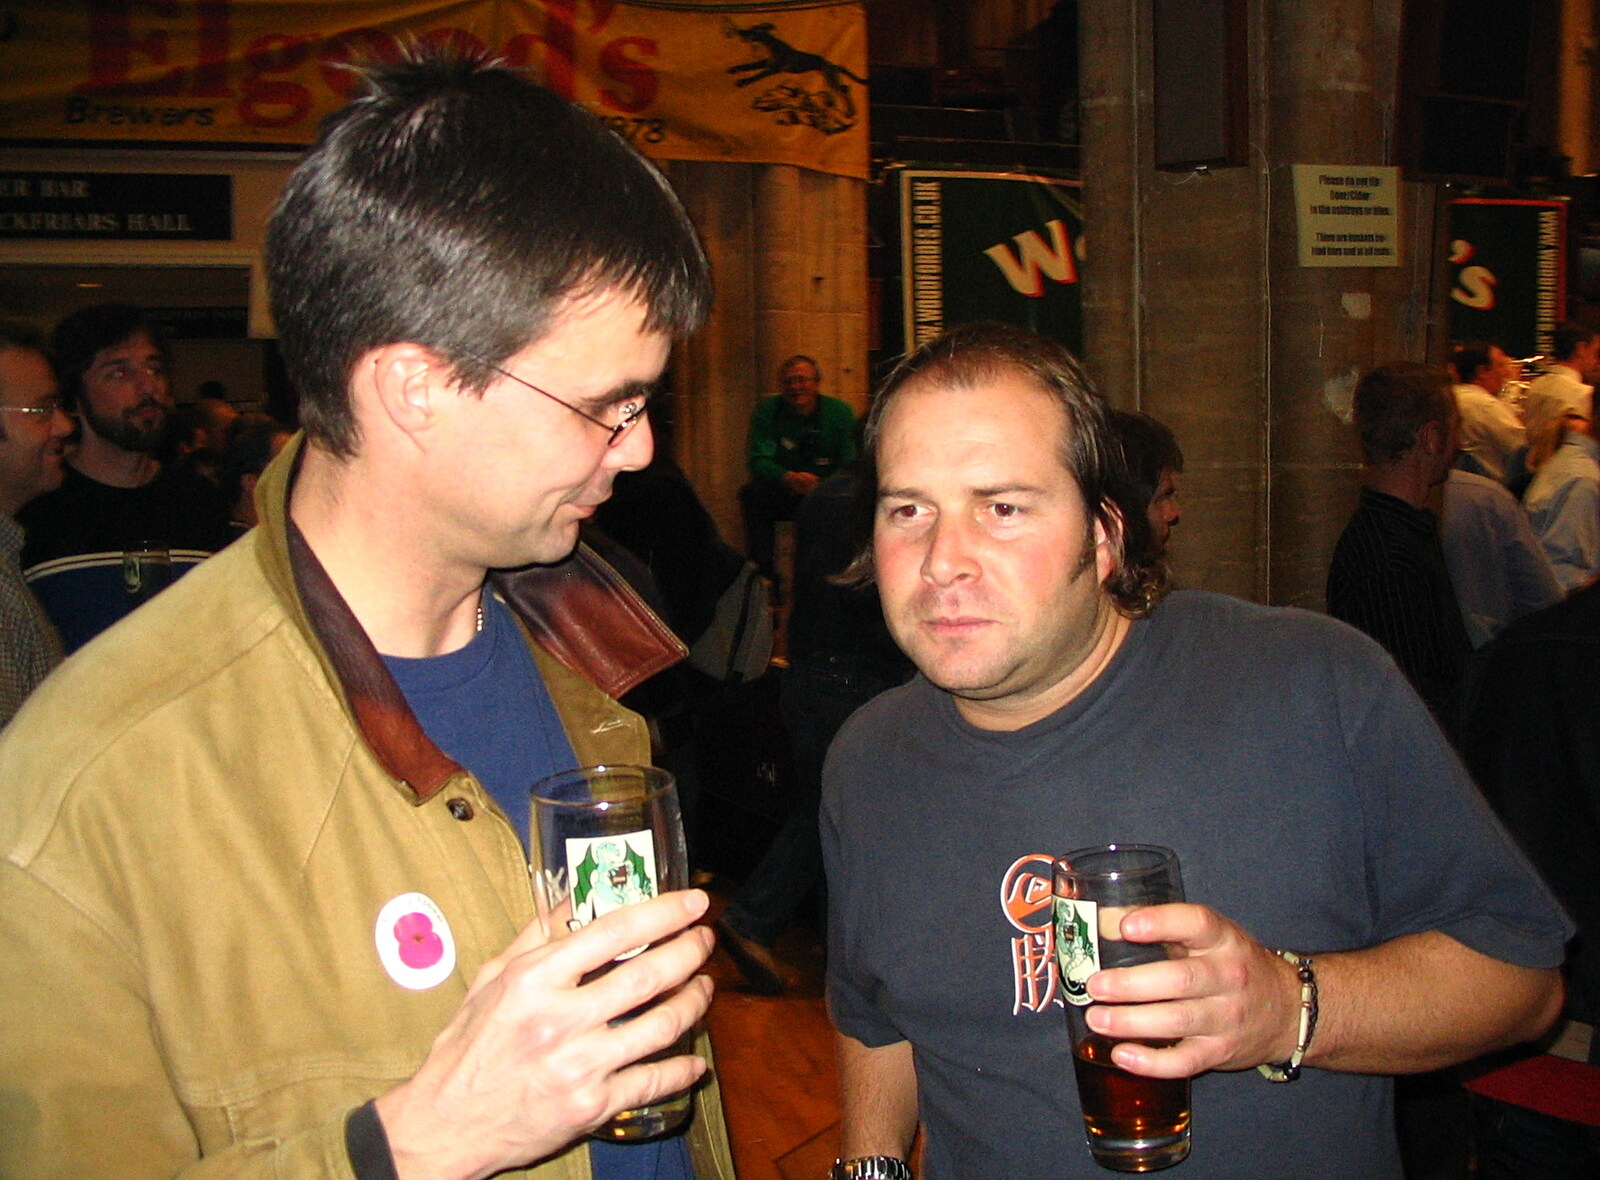 Dan chats to the other Russell from The Norfolk and Norwich Beer Festival, St. Andrew's Hall, Norwich - 27th October 2004